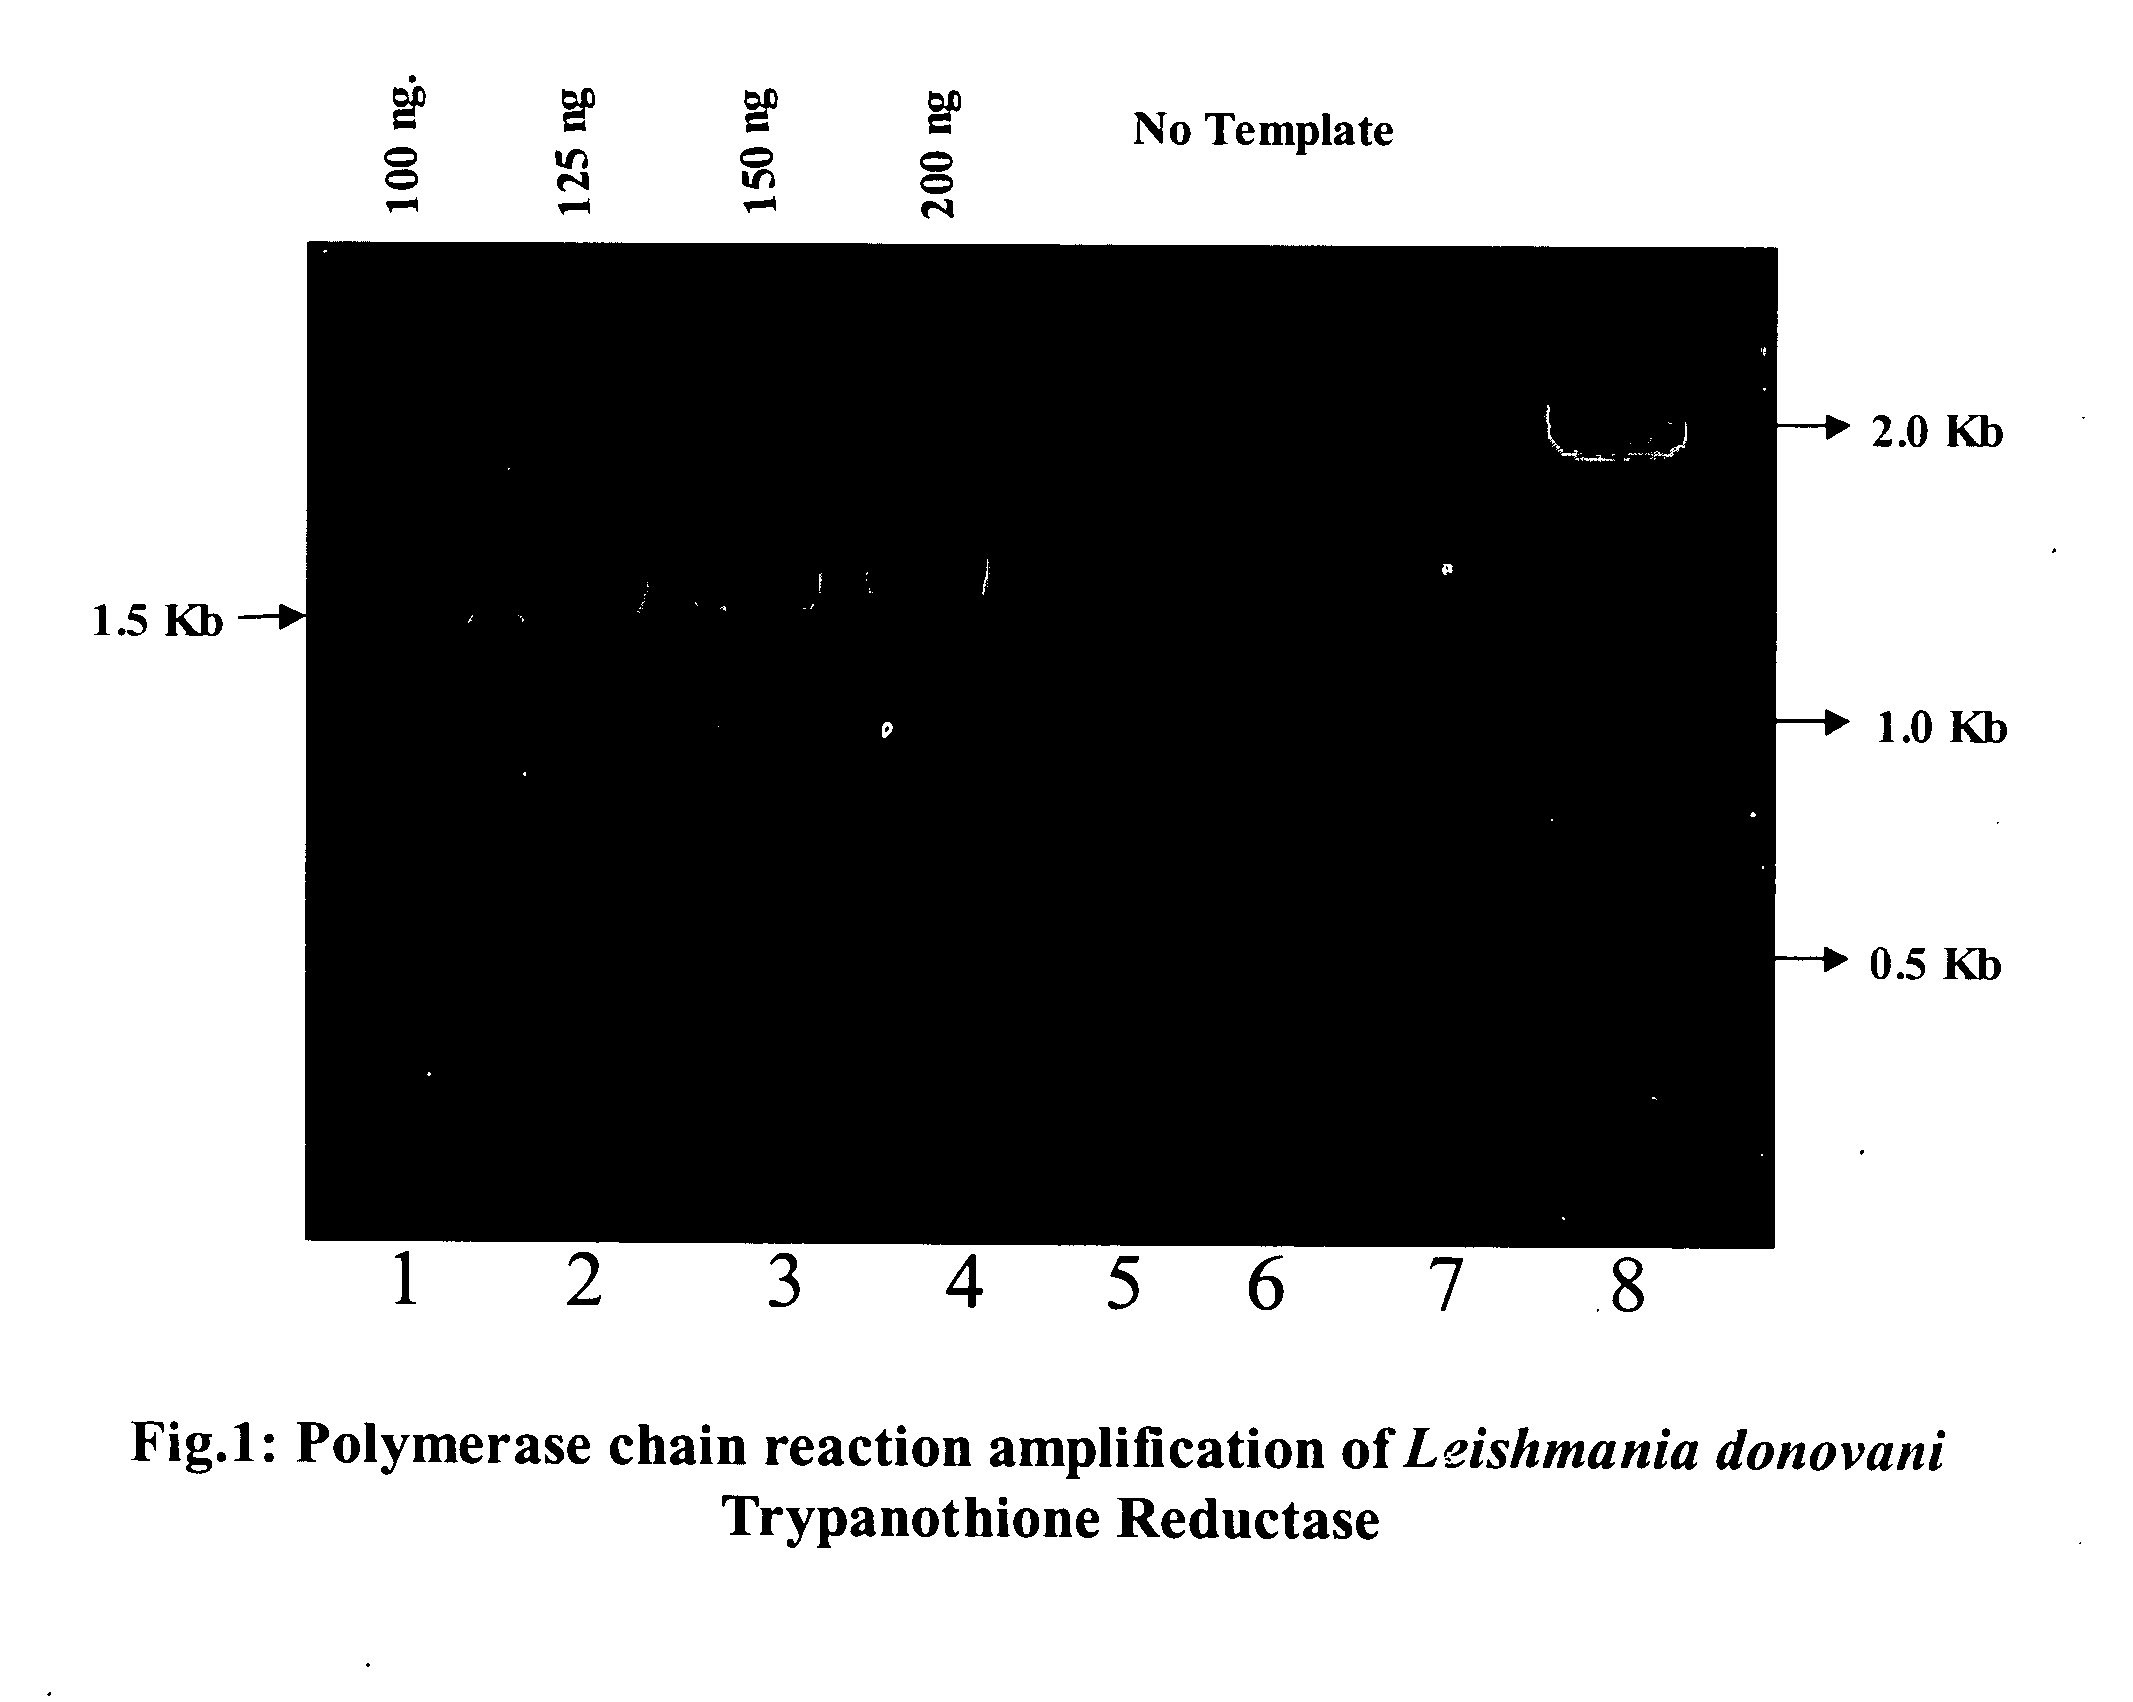 Heterologus expression of trypanothione reductase from Leishmania donovani in a prokaryotic system